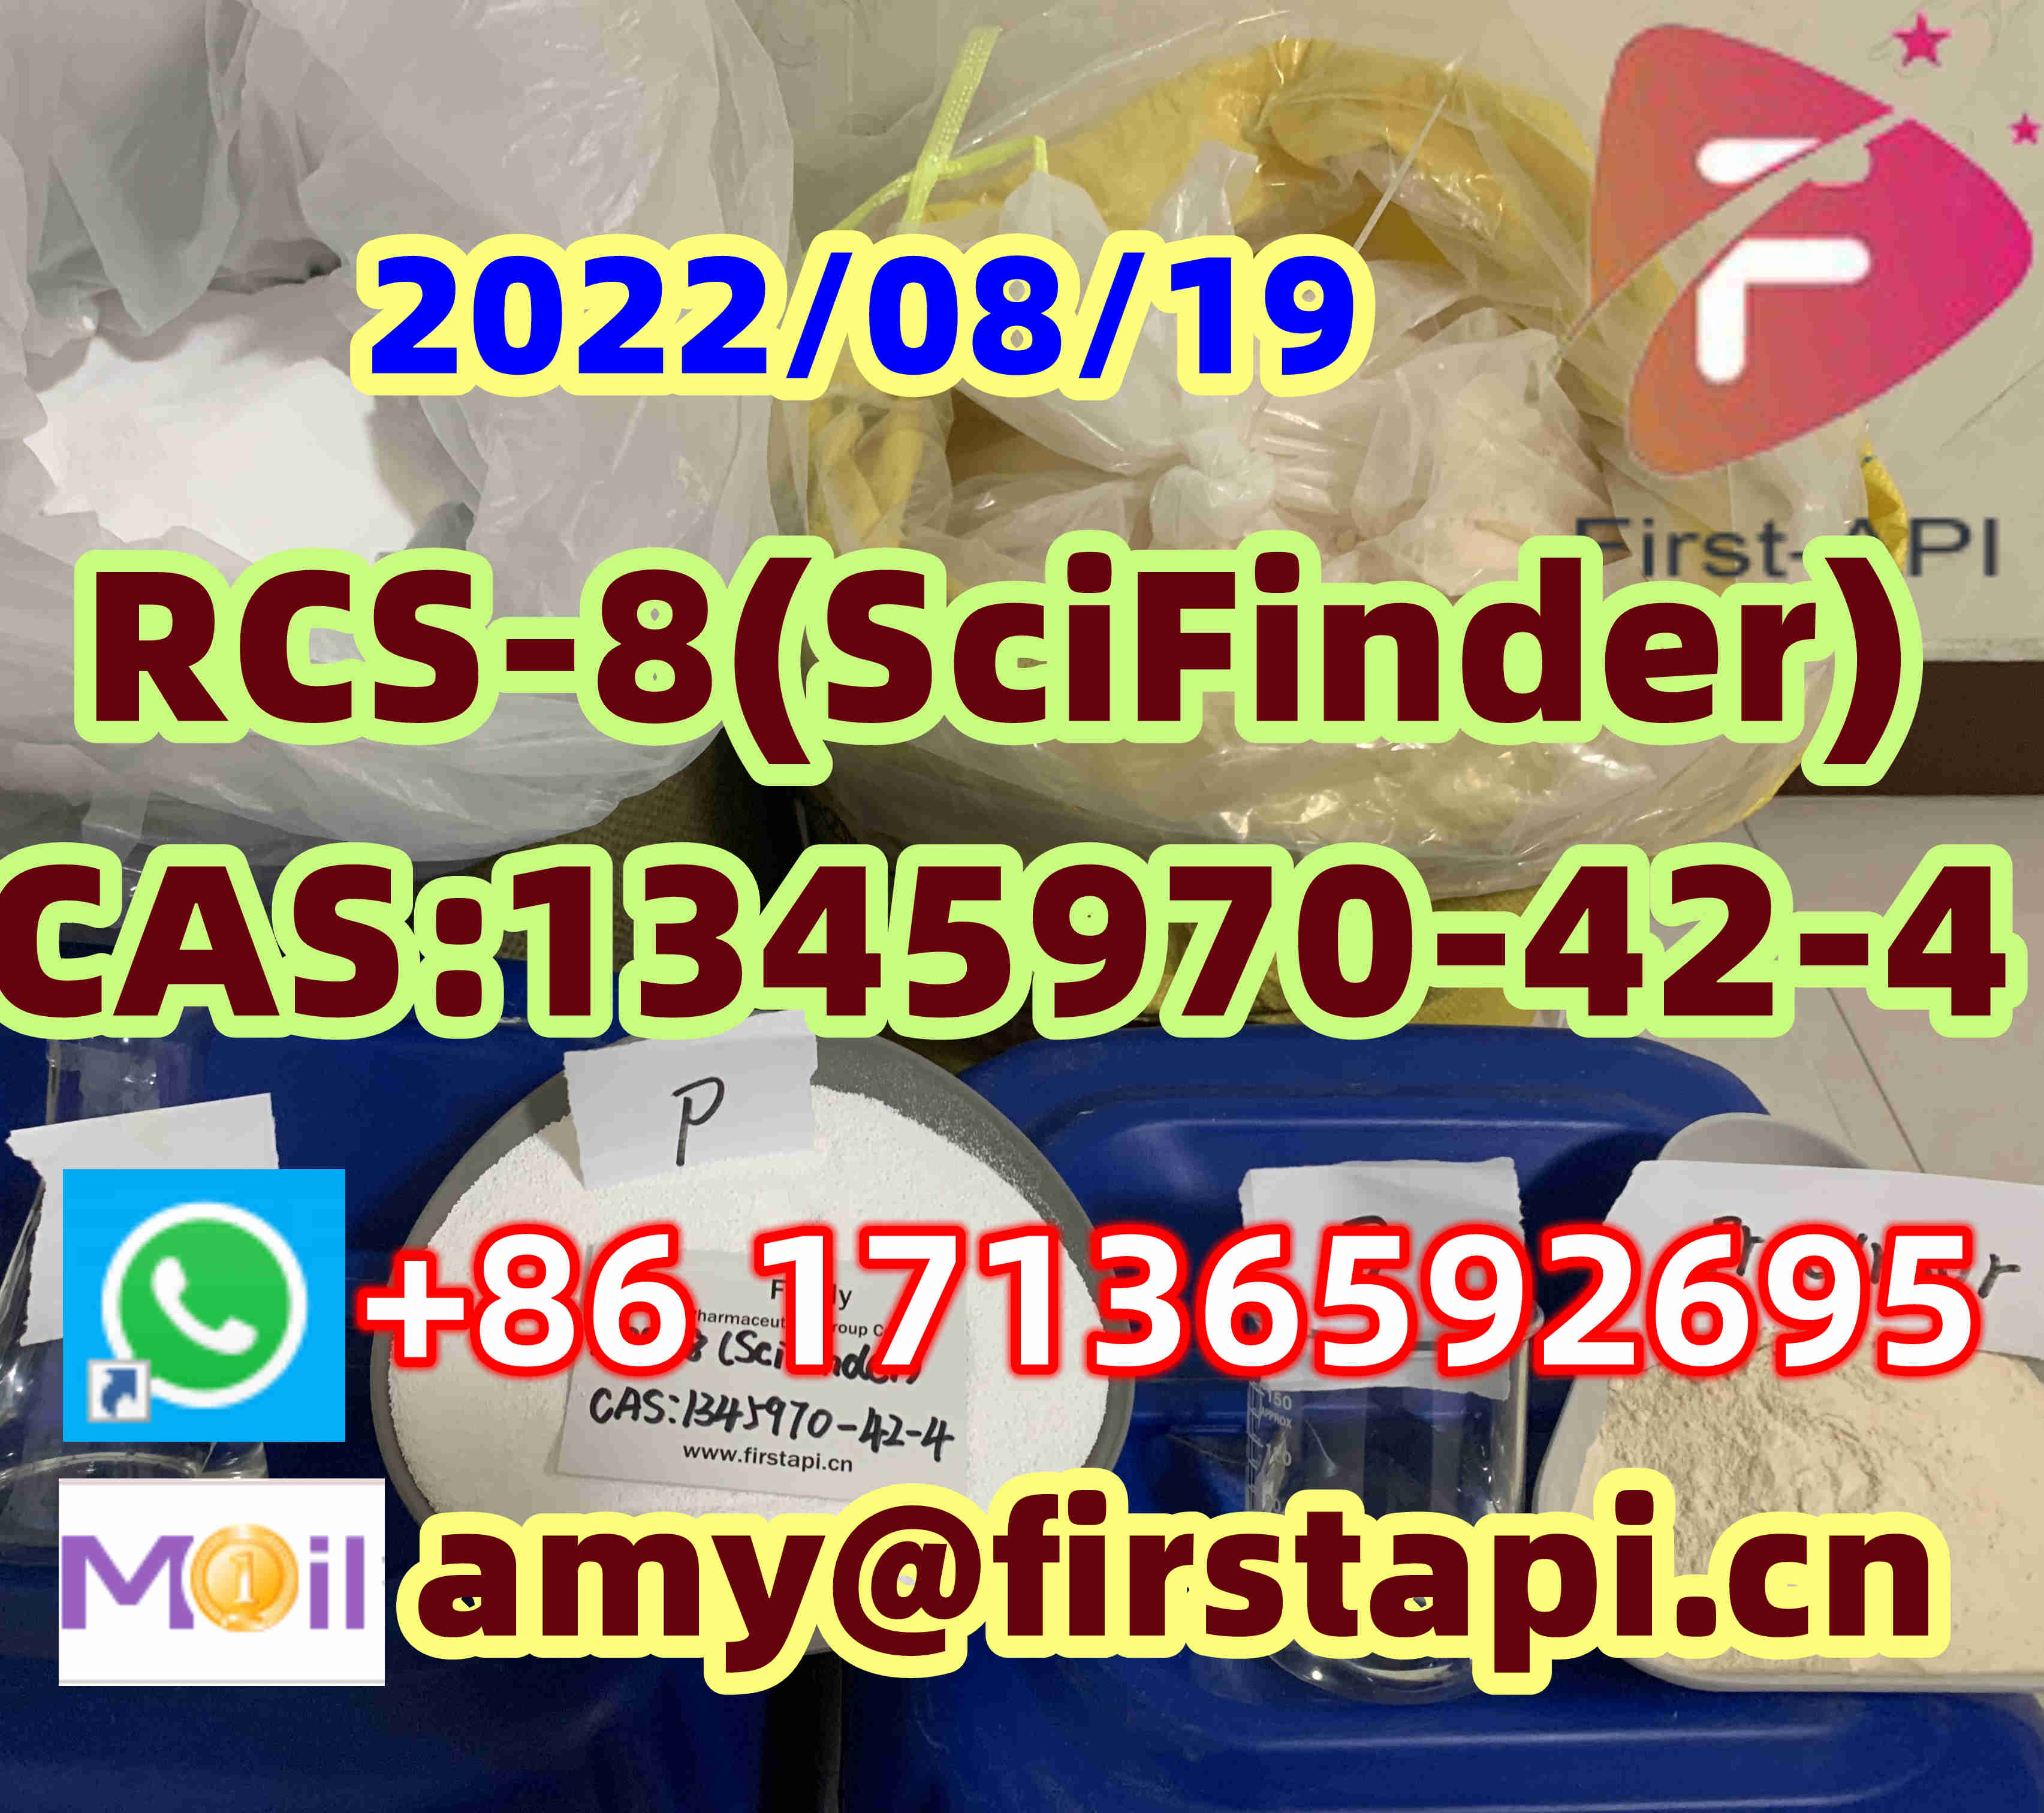 RCS-8(SciFinder),CAS:1345970-42-4,high quality,low price,fast delivery - photo